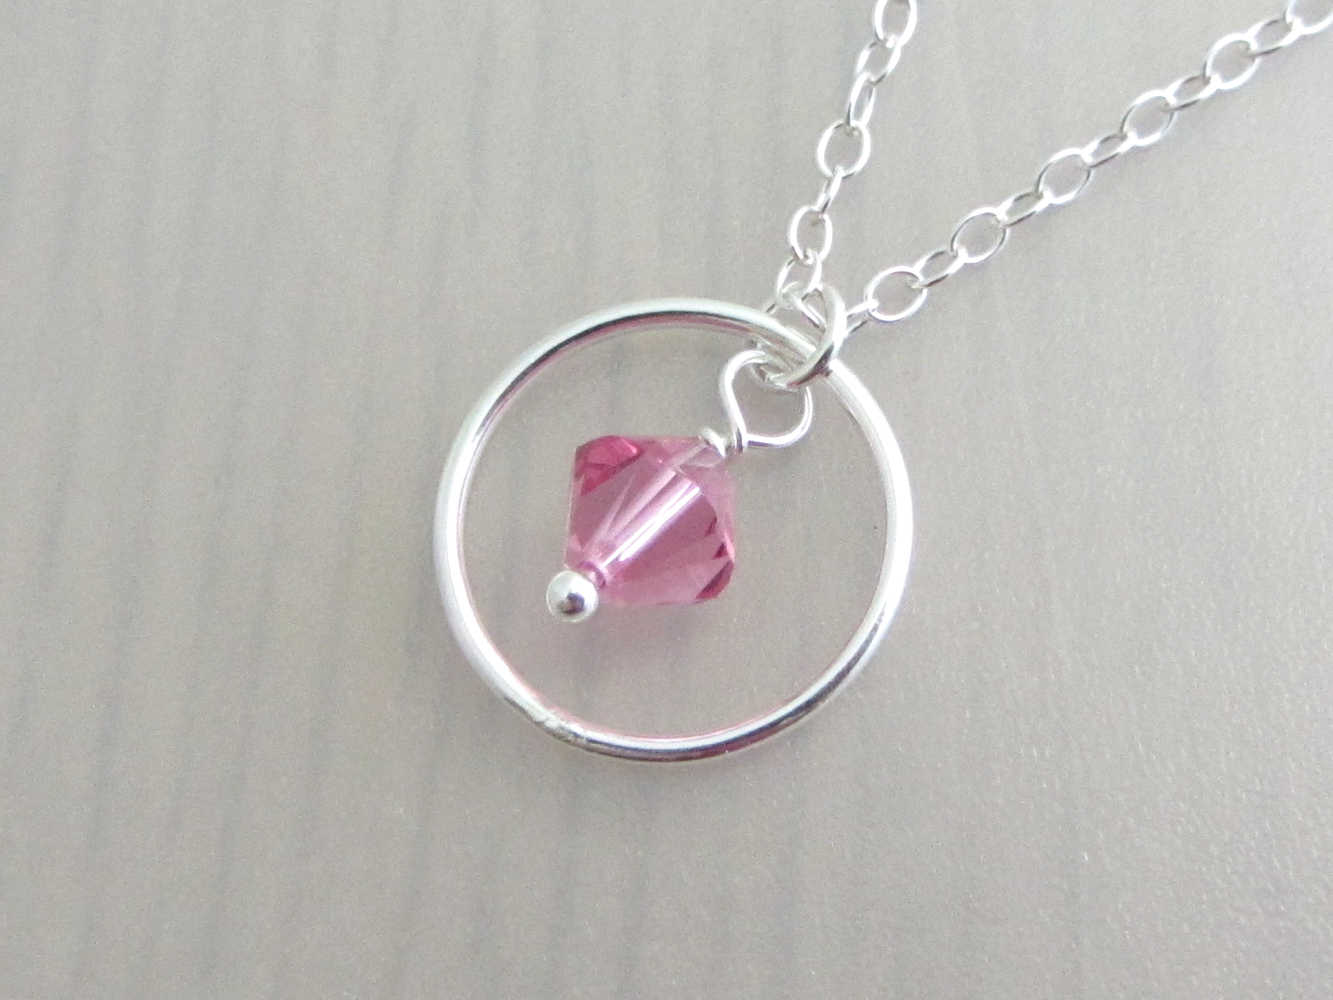 silver circle ring and pink coloured crystal charm on a silver chain